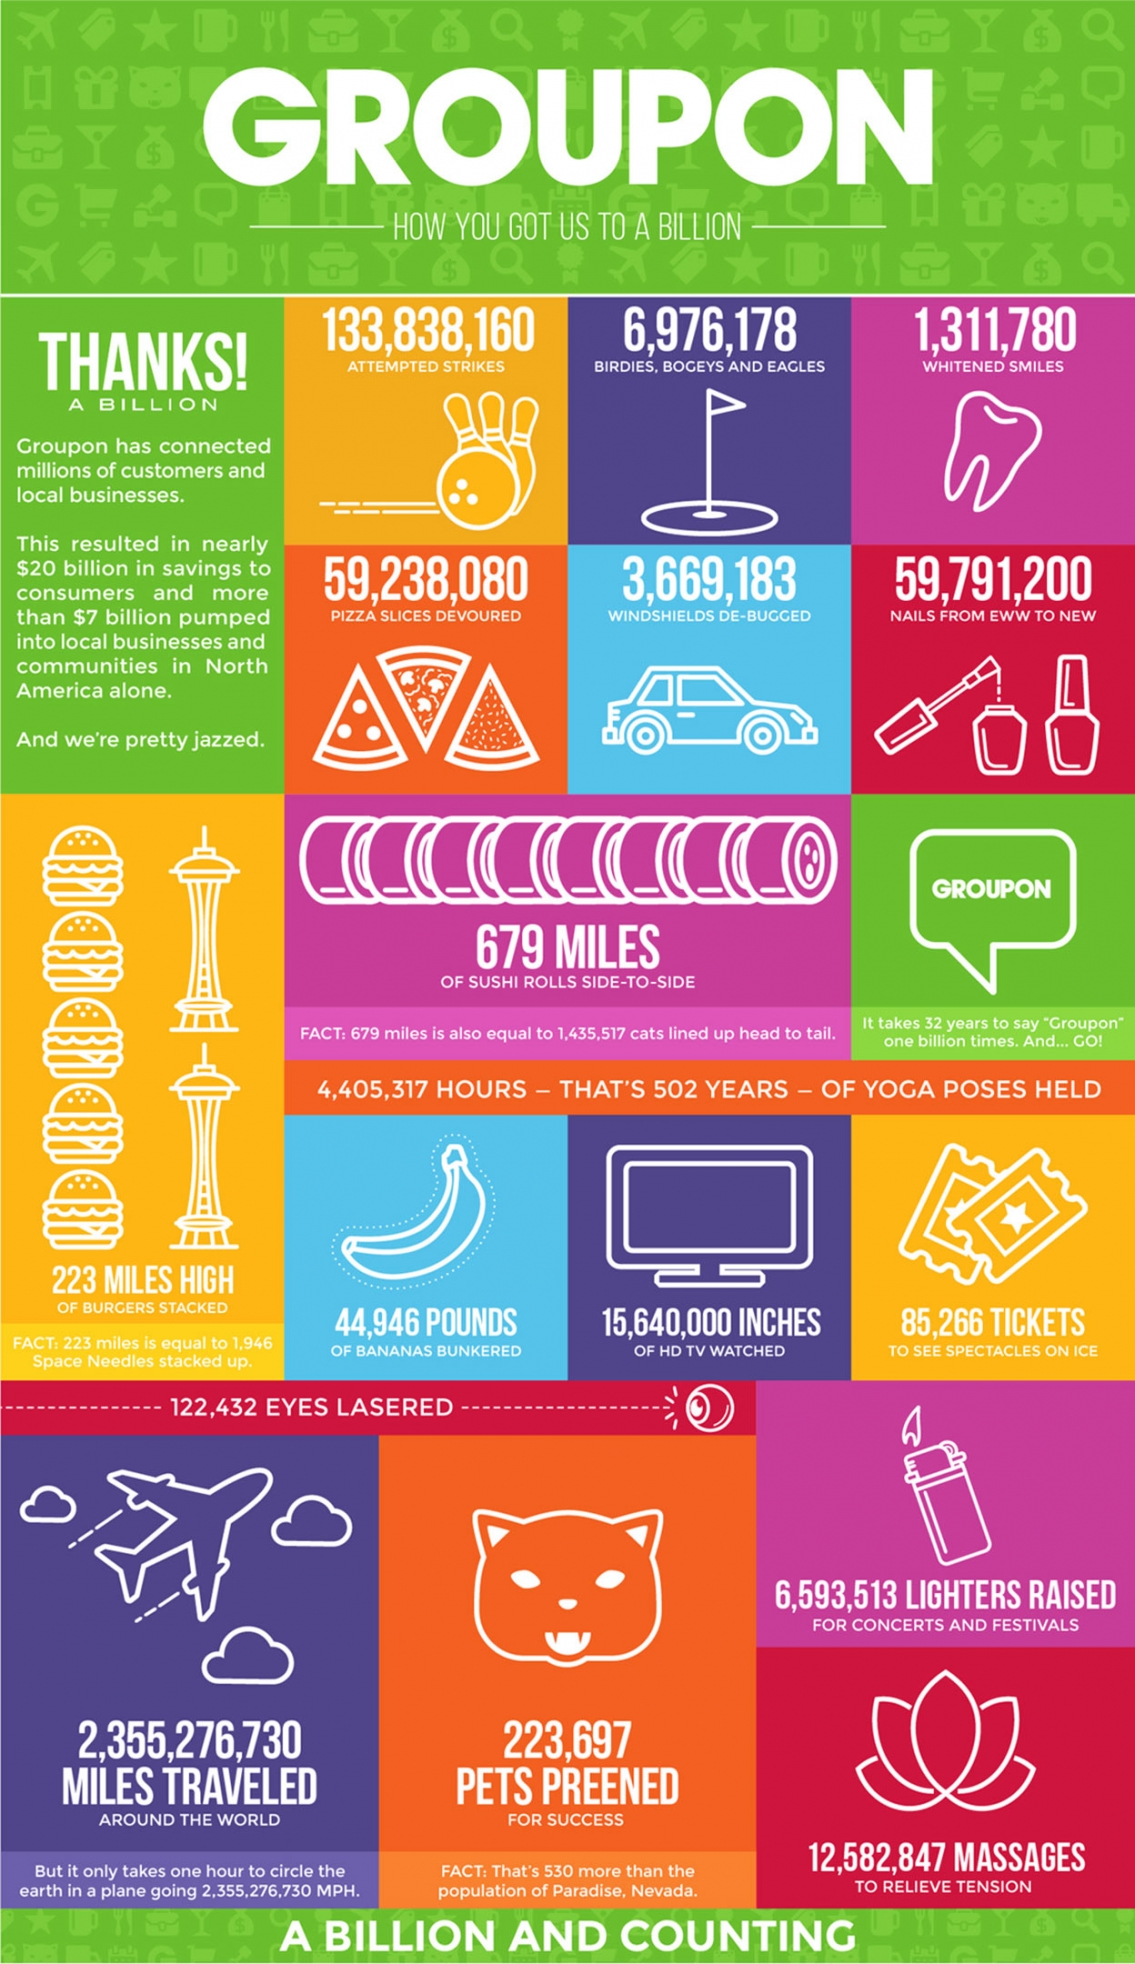 Groupon How You Got Us To A Billion - eCommerce Infographic